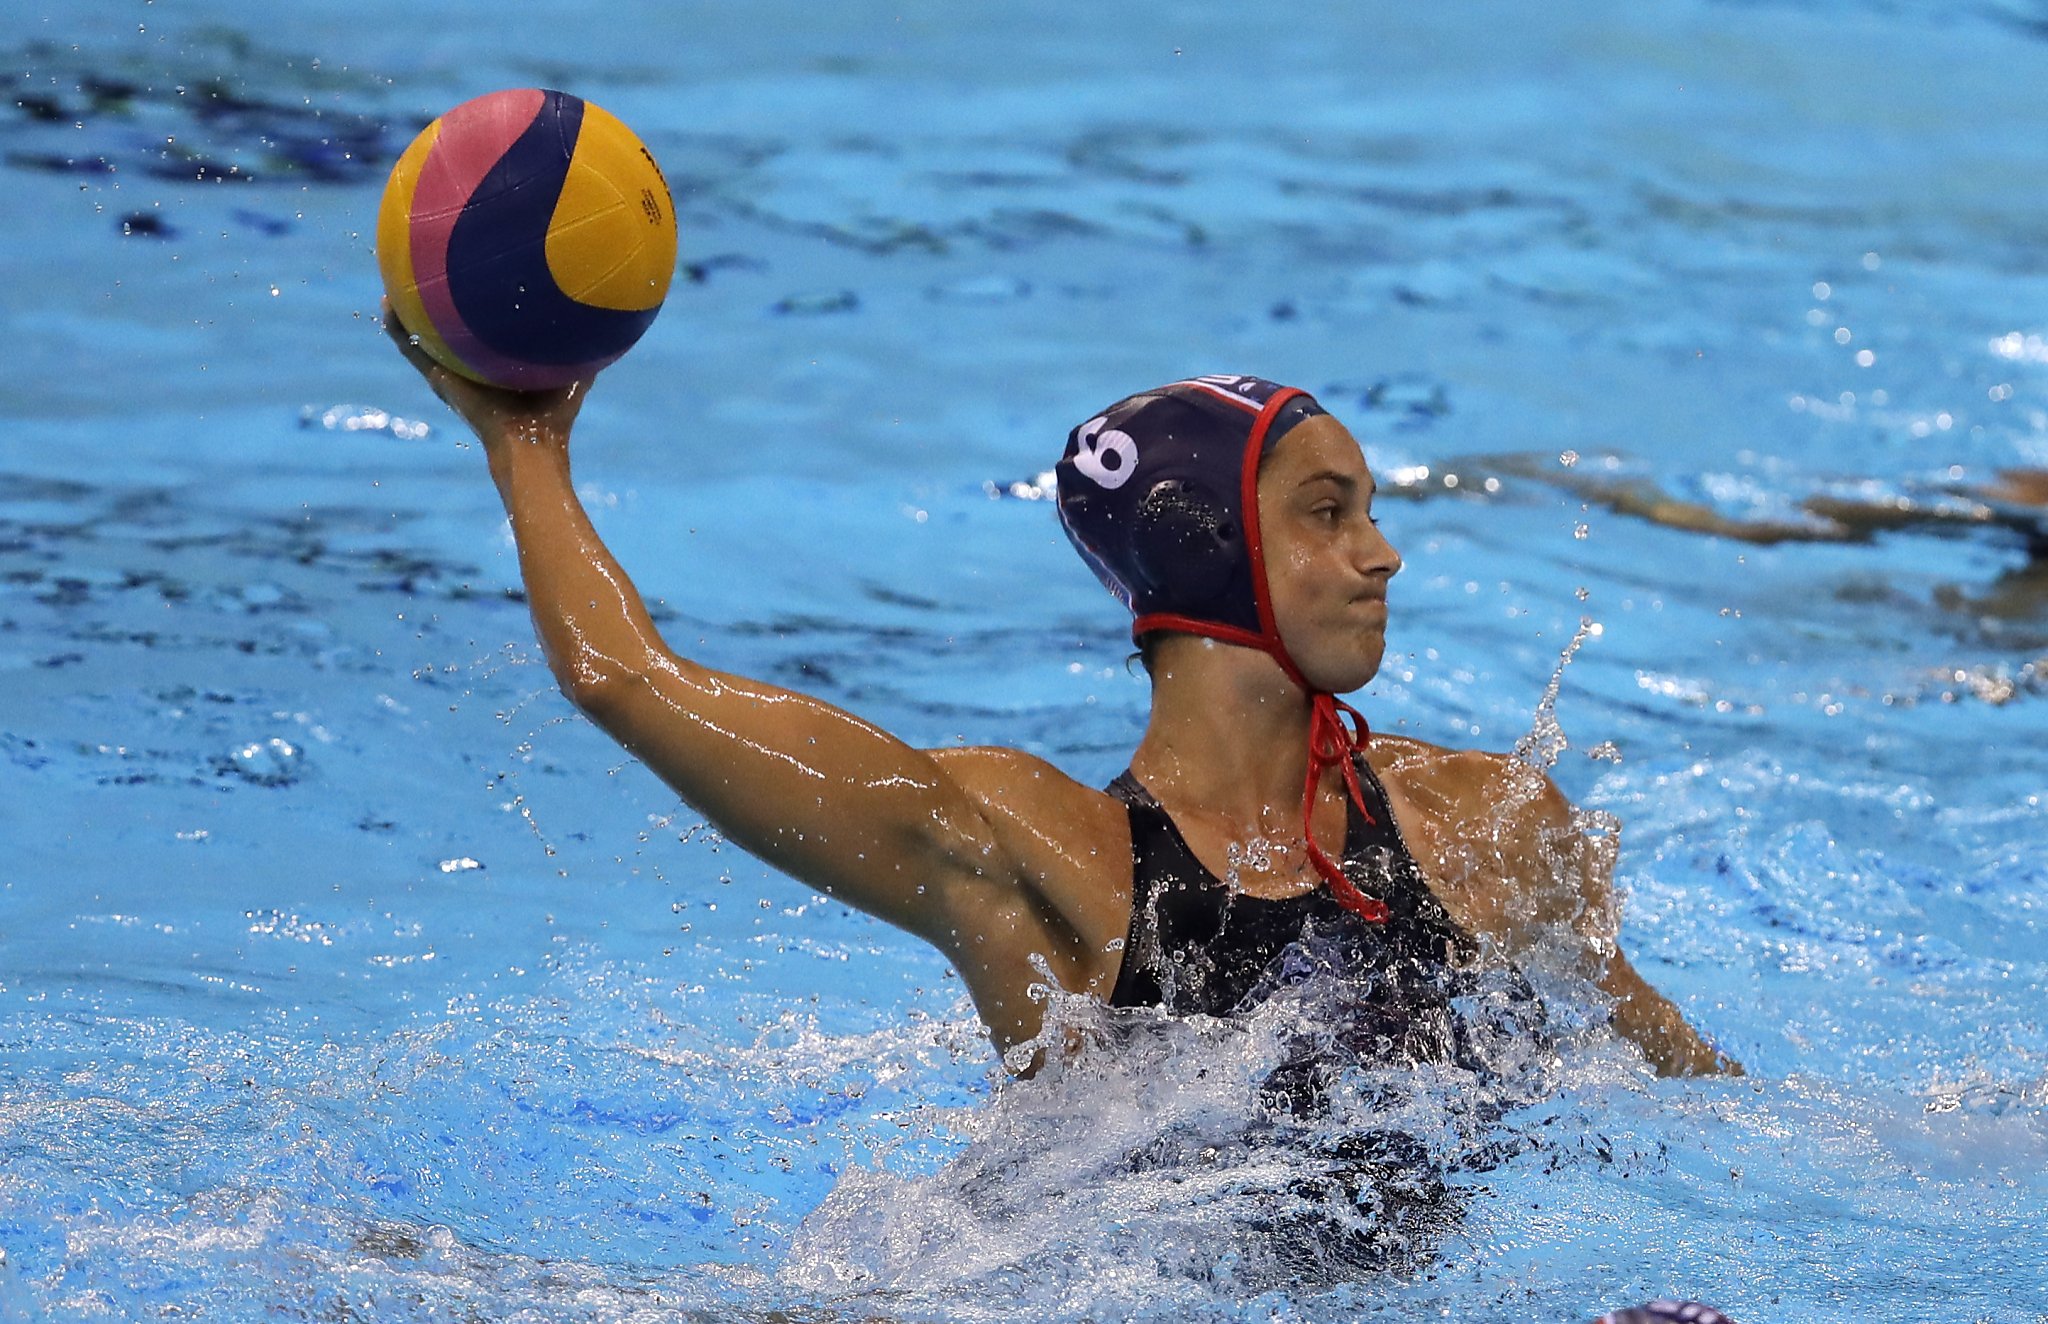 Maggie Steffens helps US reach Olympic water polo final - SFGate